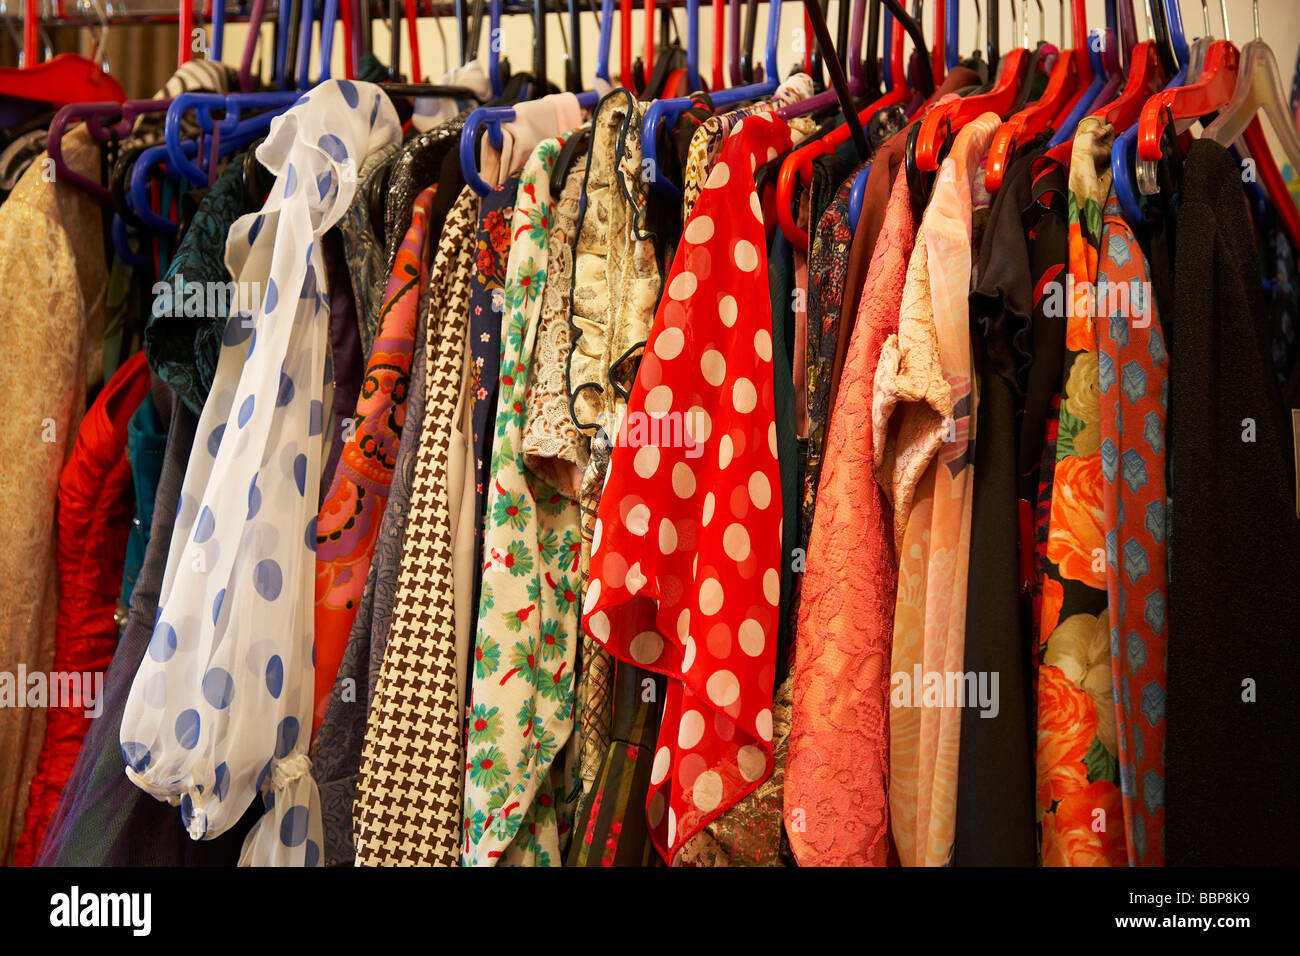 Clothes for sale, in secondhand shop Stock Photo